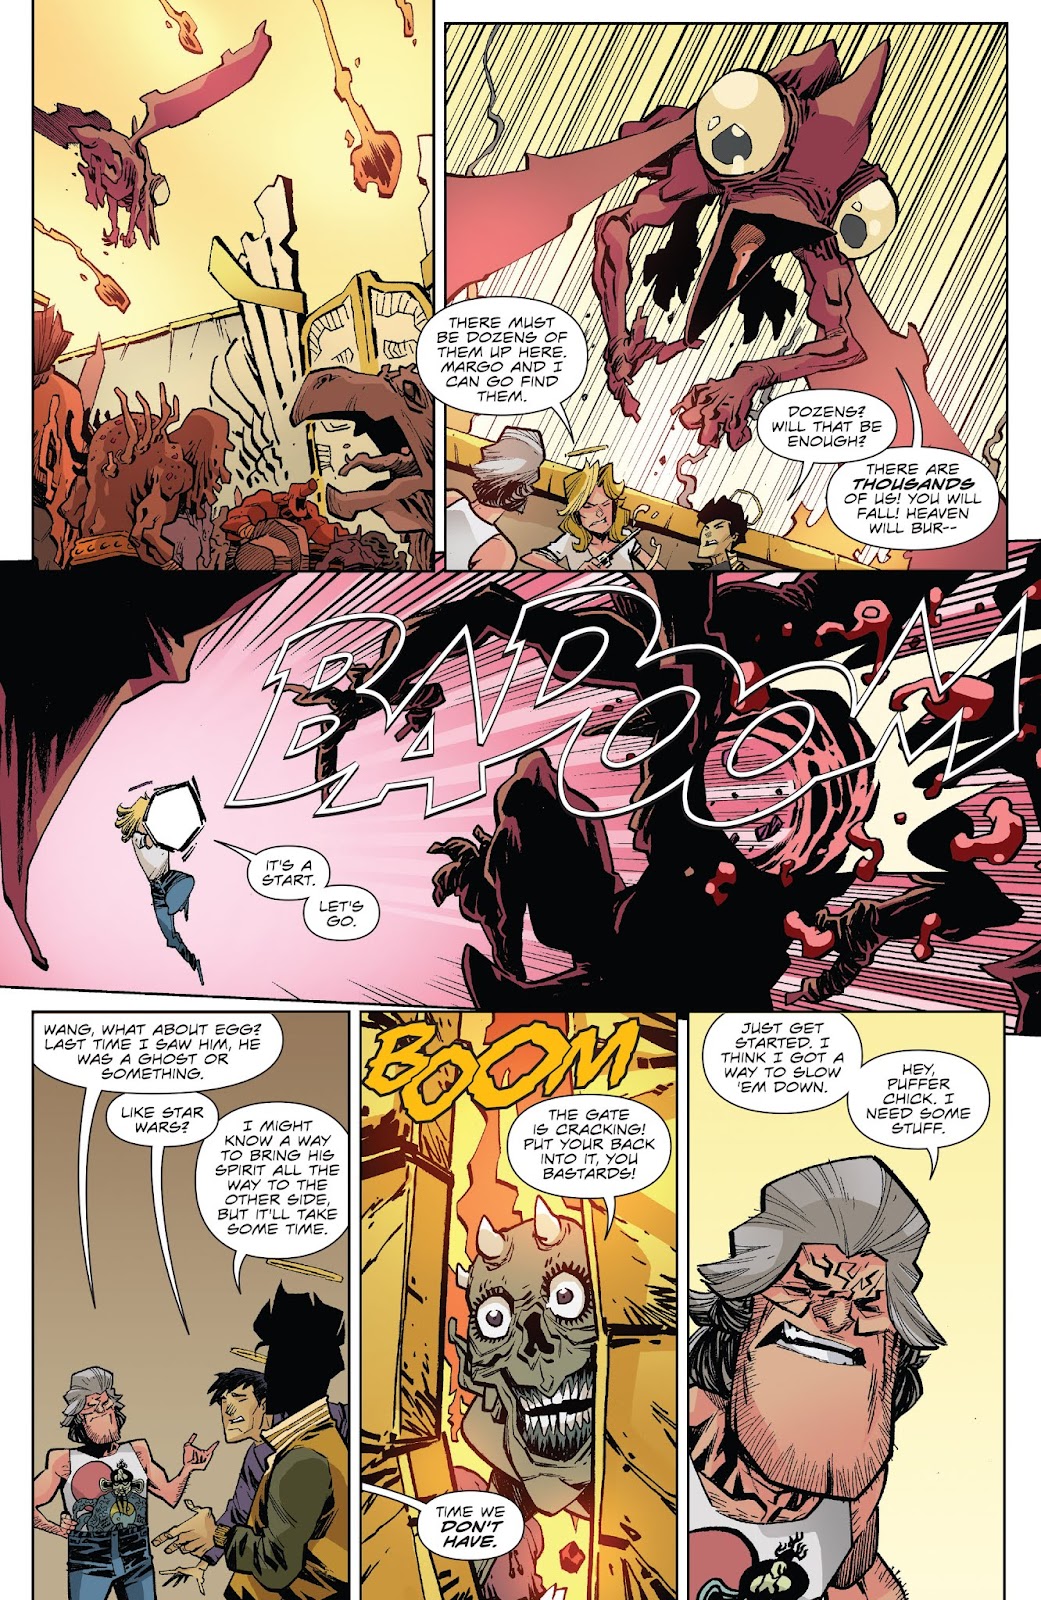 Big Trouble in Little China: Old Man Jack issue 11 - Page 11